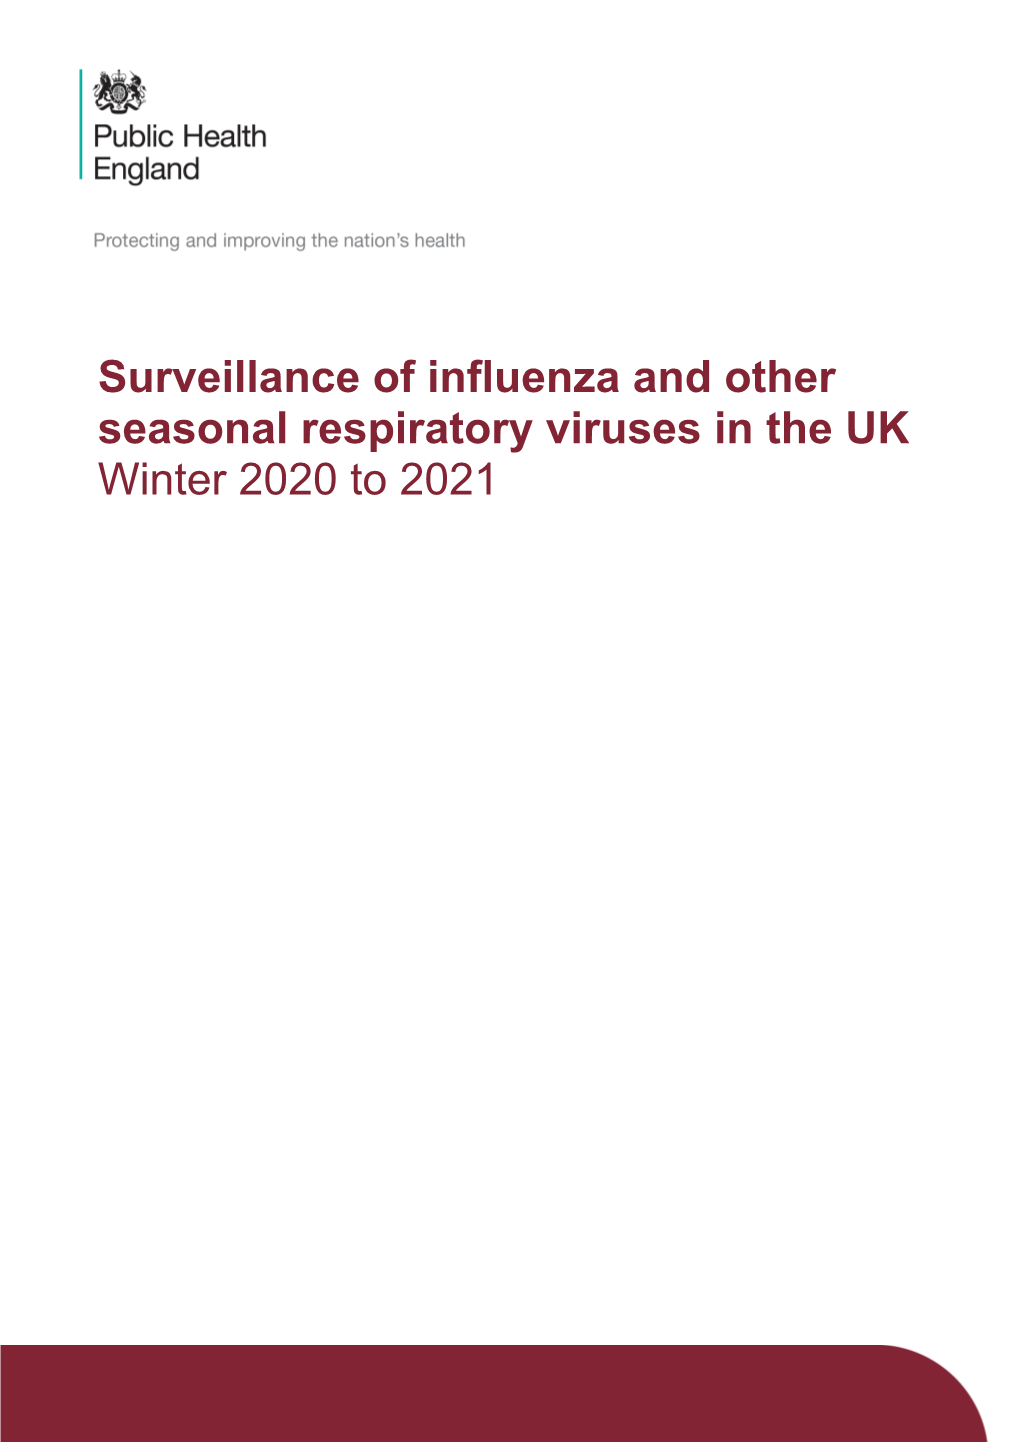 Surveillance of Influenza and Other Seasonal Respiratory Viruses in the UK. Winter 2020 to 2021